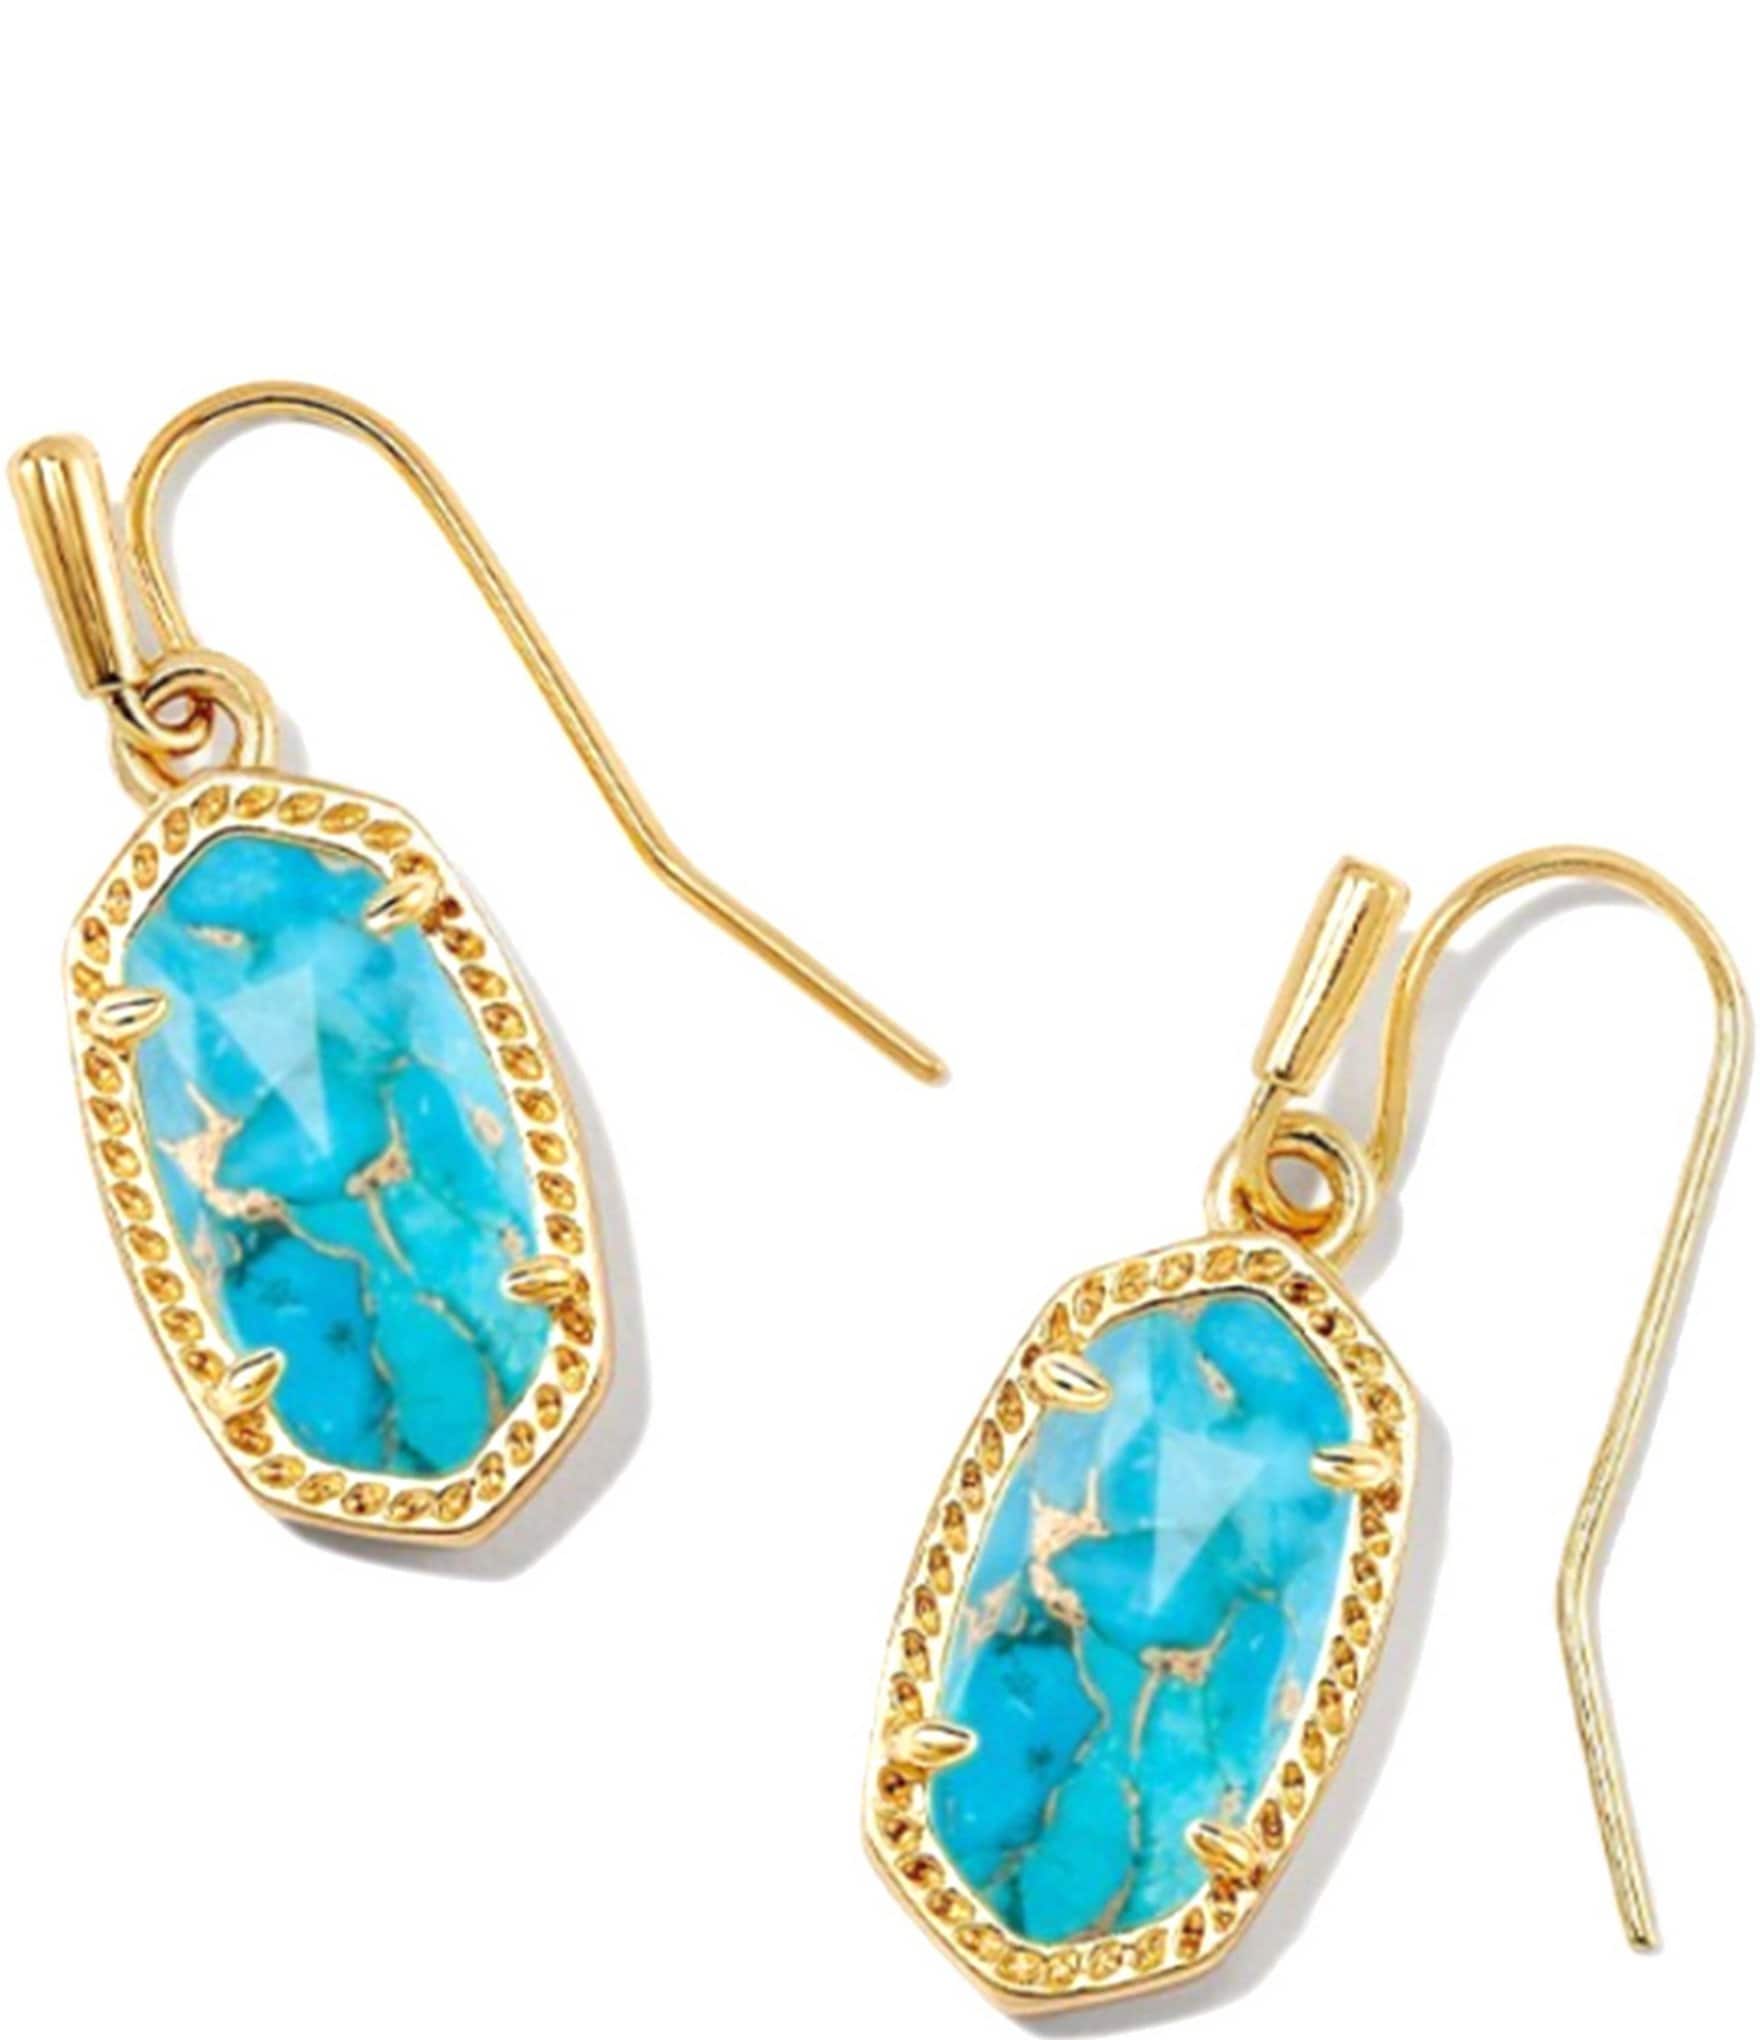 EARLOBE WONDERS by Kendra Scott, If you don't want droopy earlobes in the  future watch this video. 😂 Kendra Scott's LOBE WONDERS to the rescue!!!, By Tara & Co. Diamonds